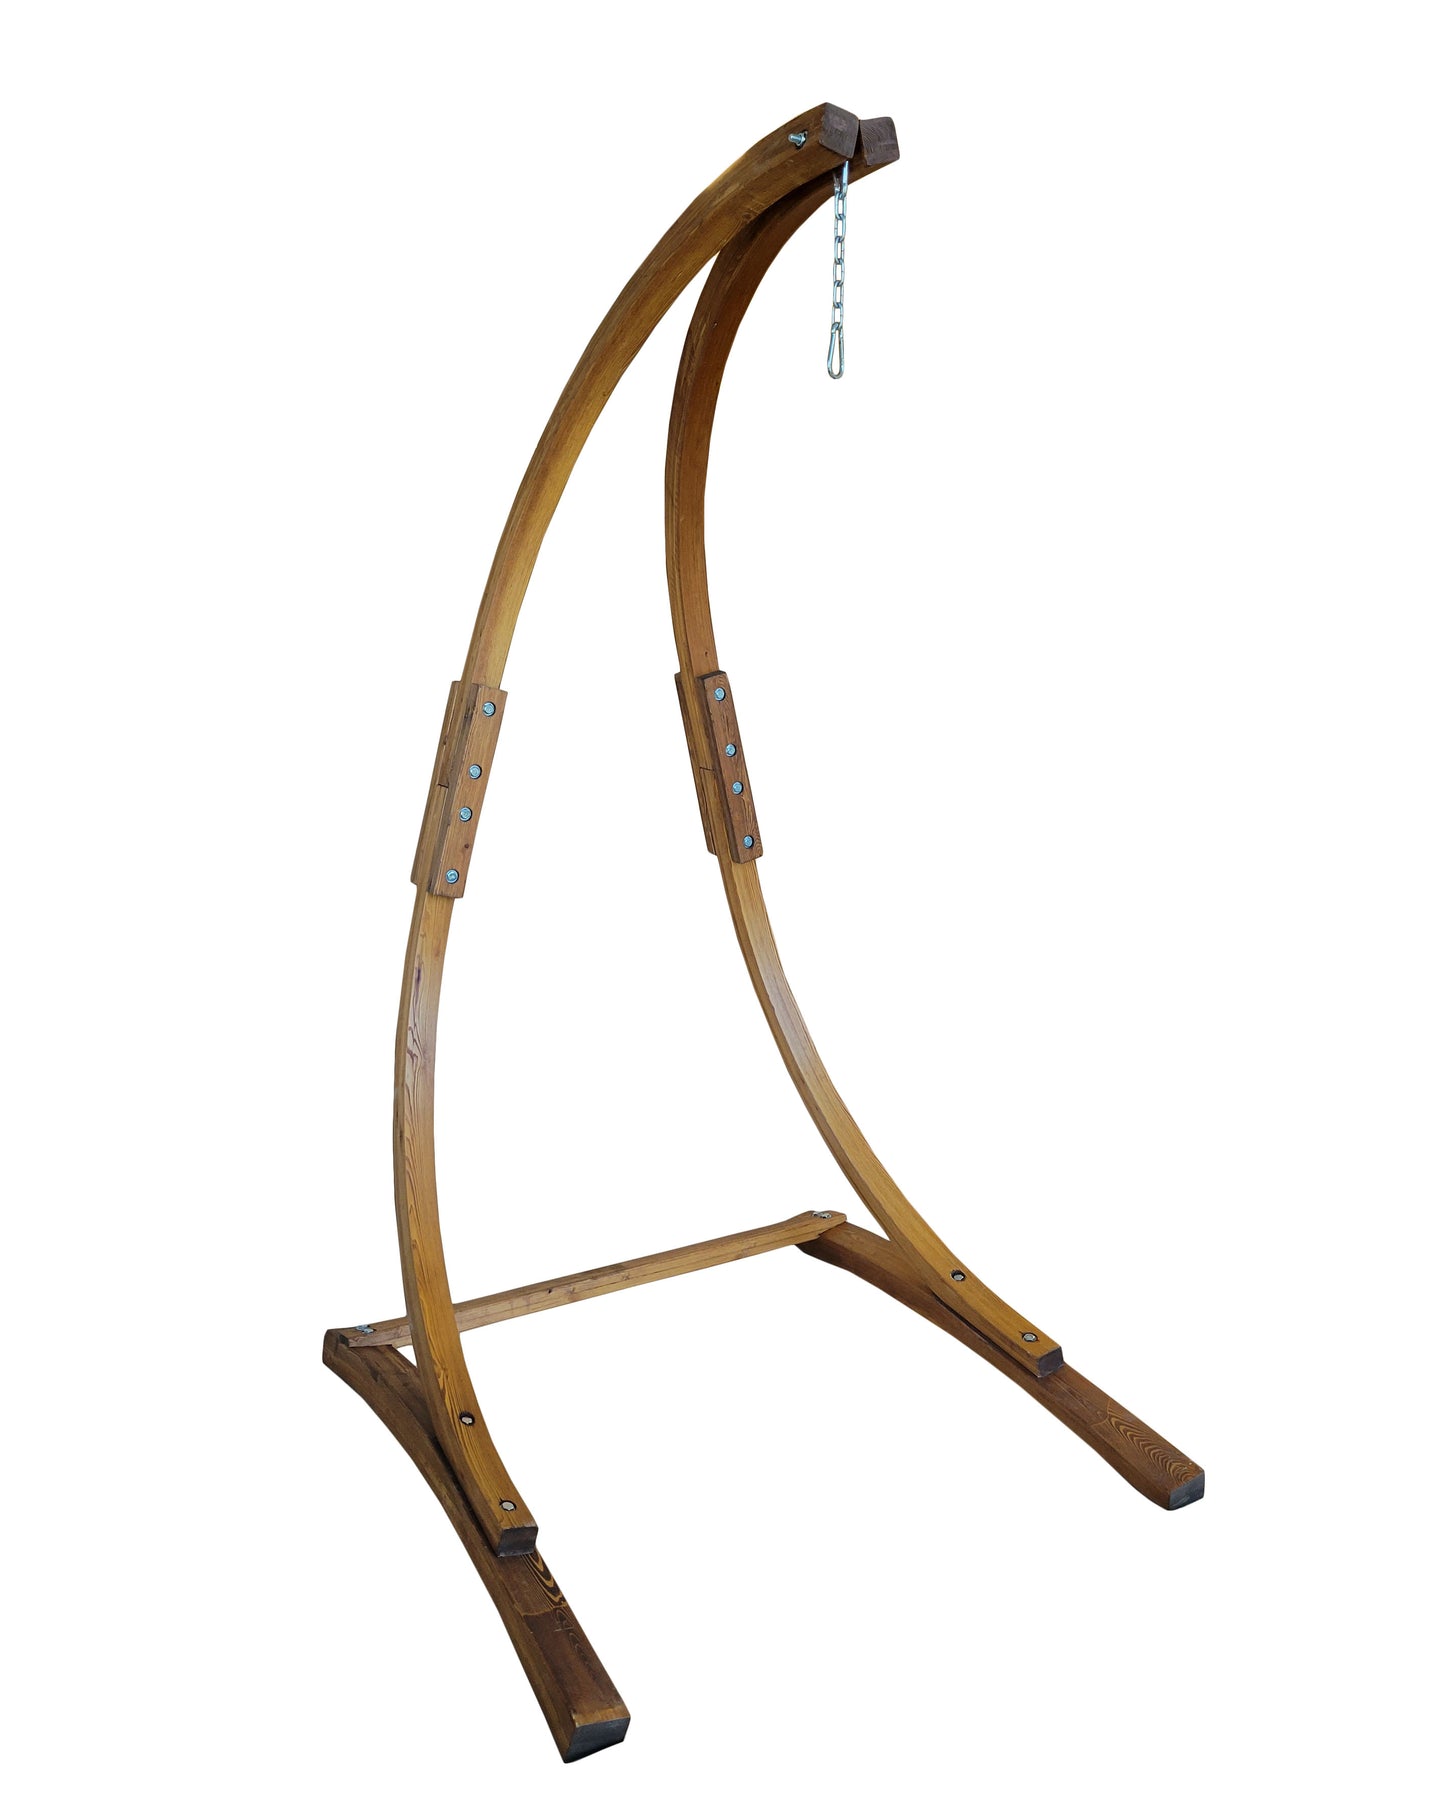 7 Ft. Water Treated Wooden Arc Hammock Chair Stand. Teak Stain